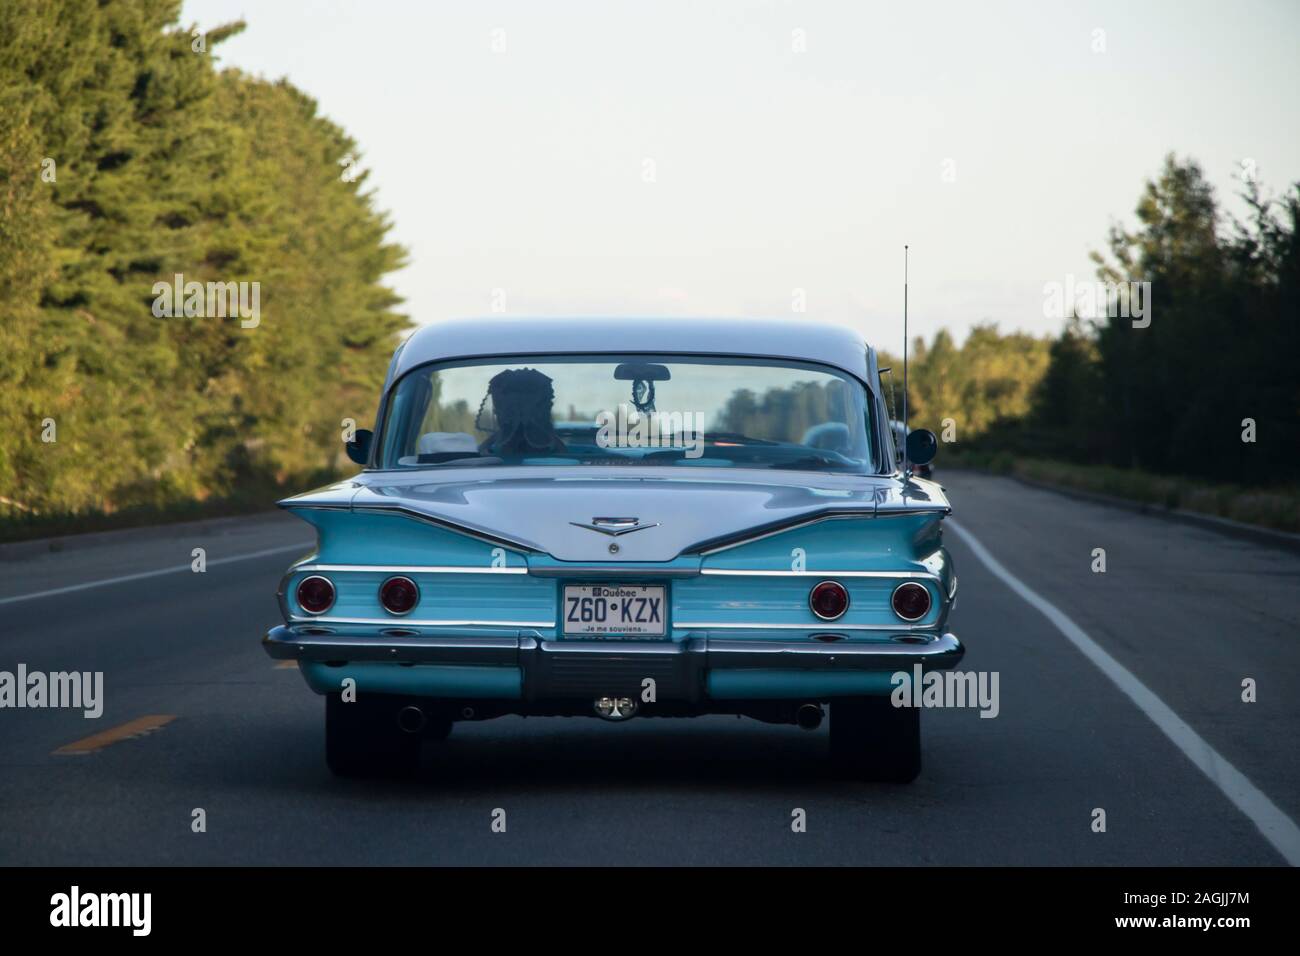 August 24, 2019 - Rte 343, QC: Rear View of Vintage Retro Buick Car and a woman driver on the Road after Kildare Deluxe Classic Car Exhibition Event Stock Photo